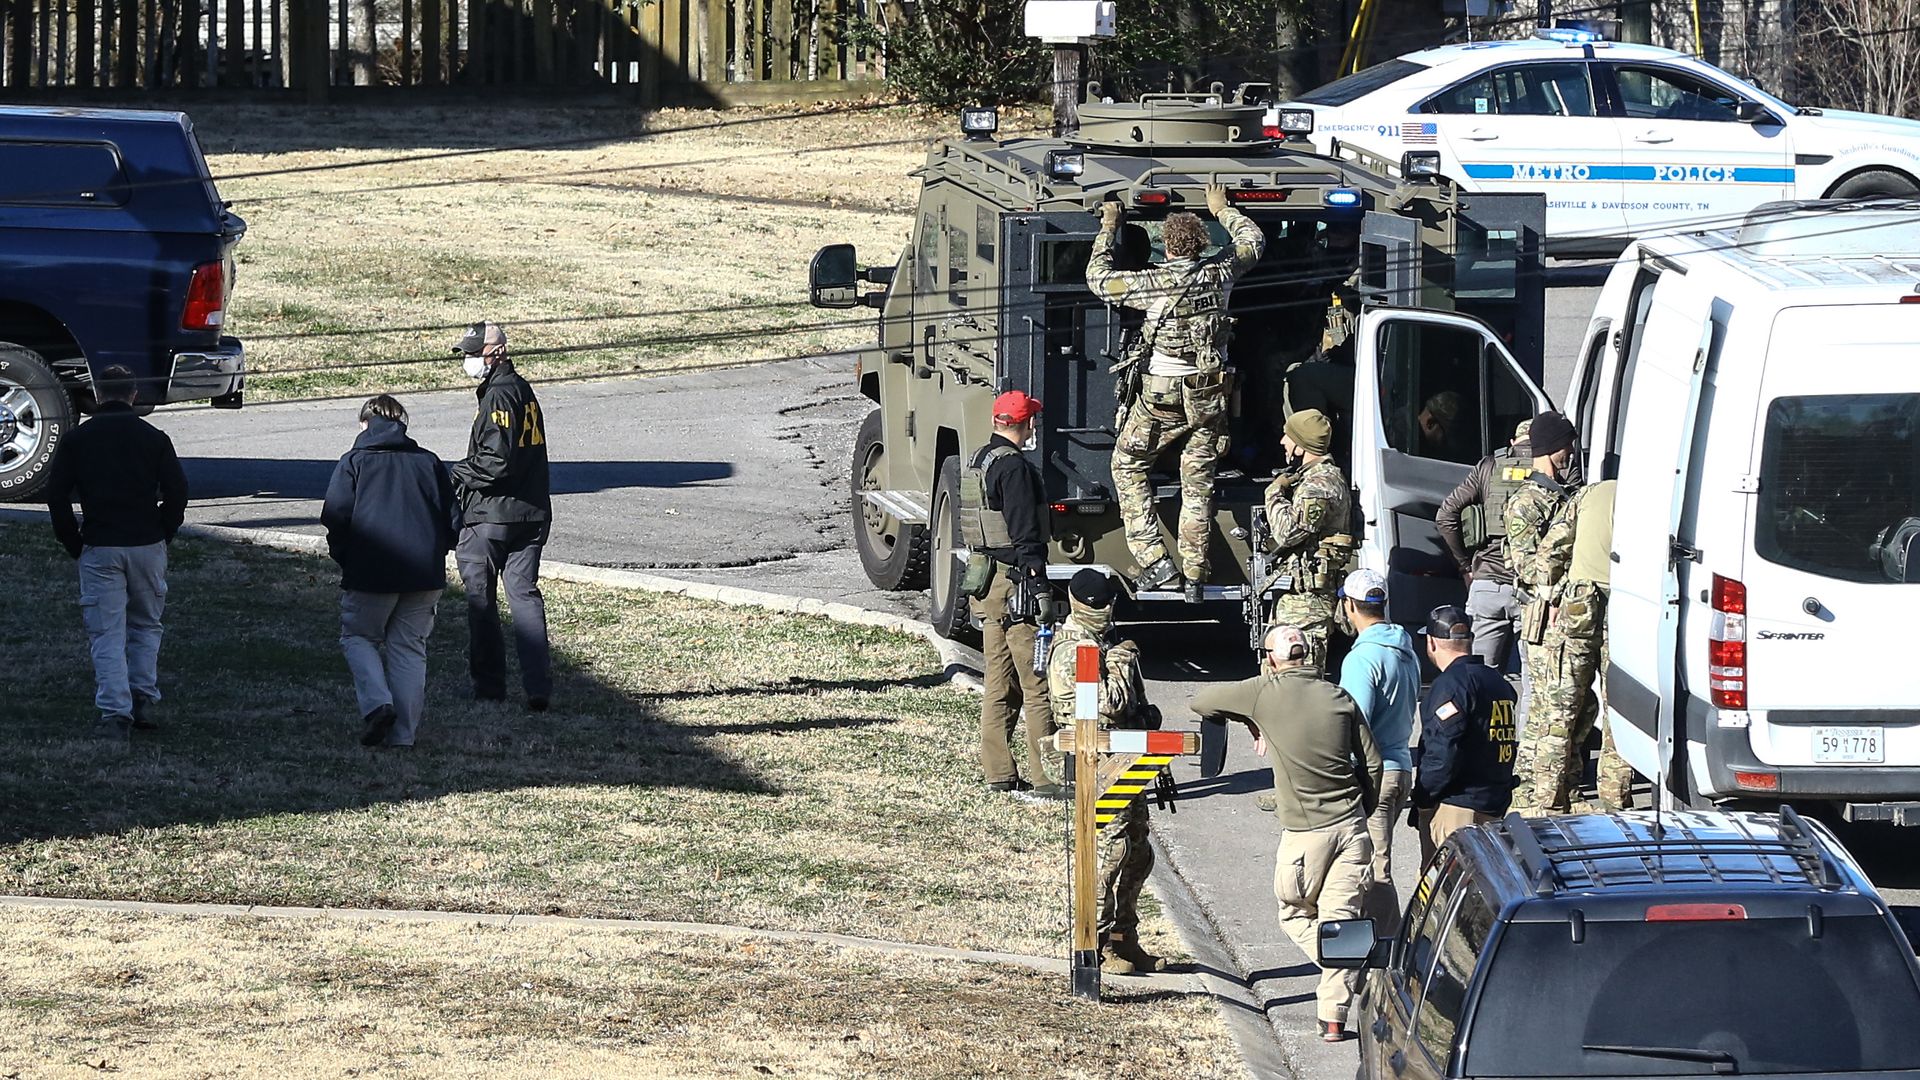 Law enforcement officers investigate the house belonging a person of interest in the Nashville bombing